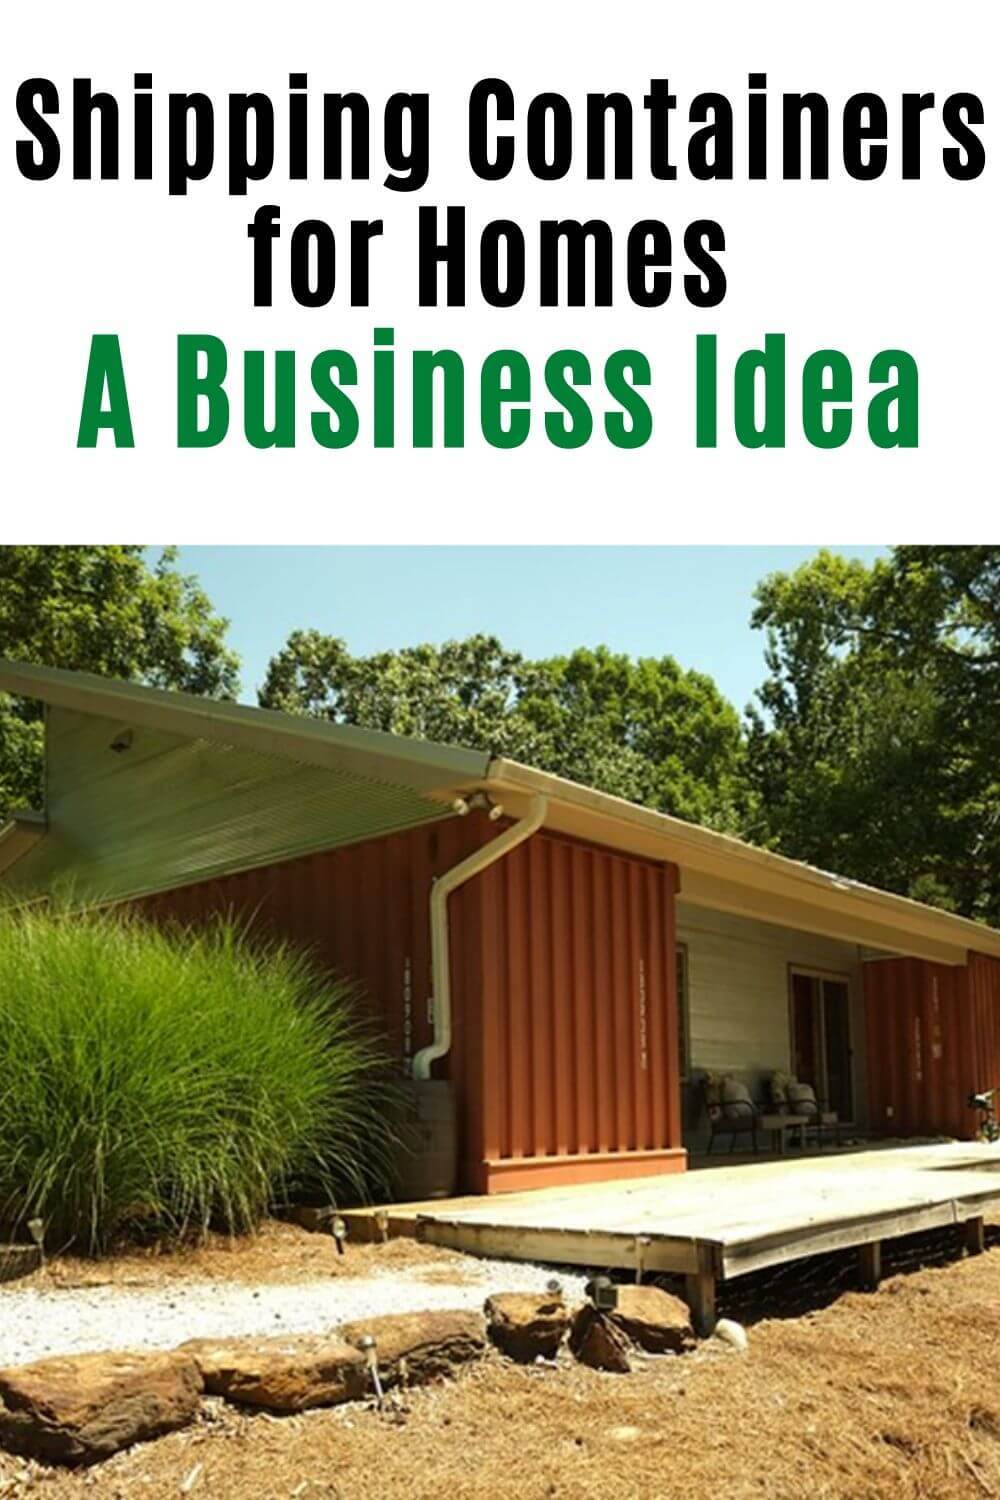 shopping containers for homes - a business idea